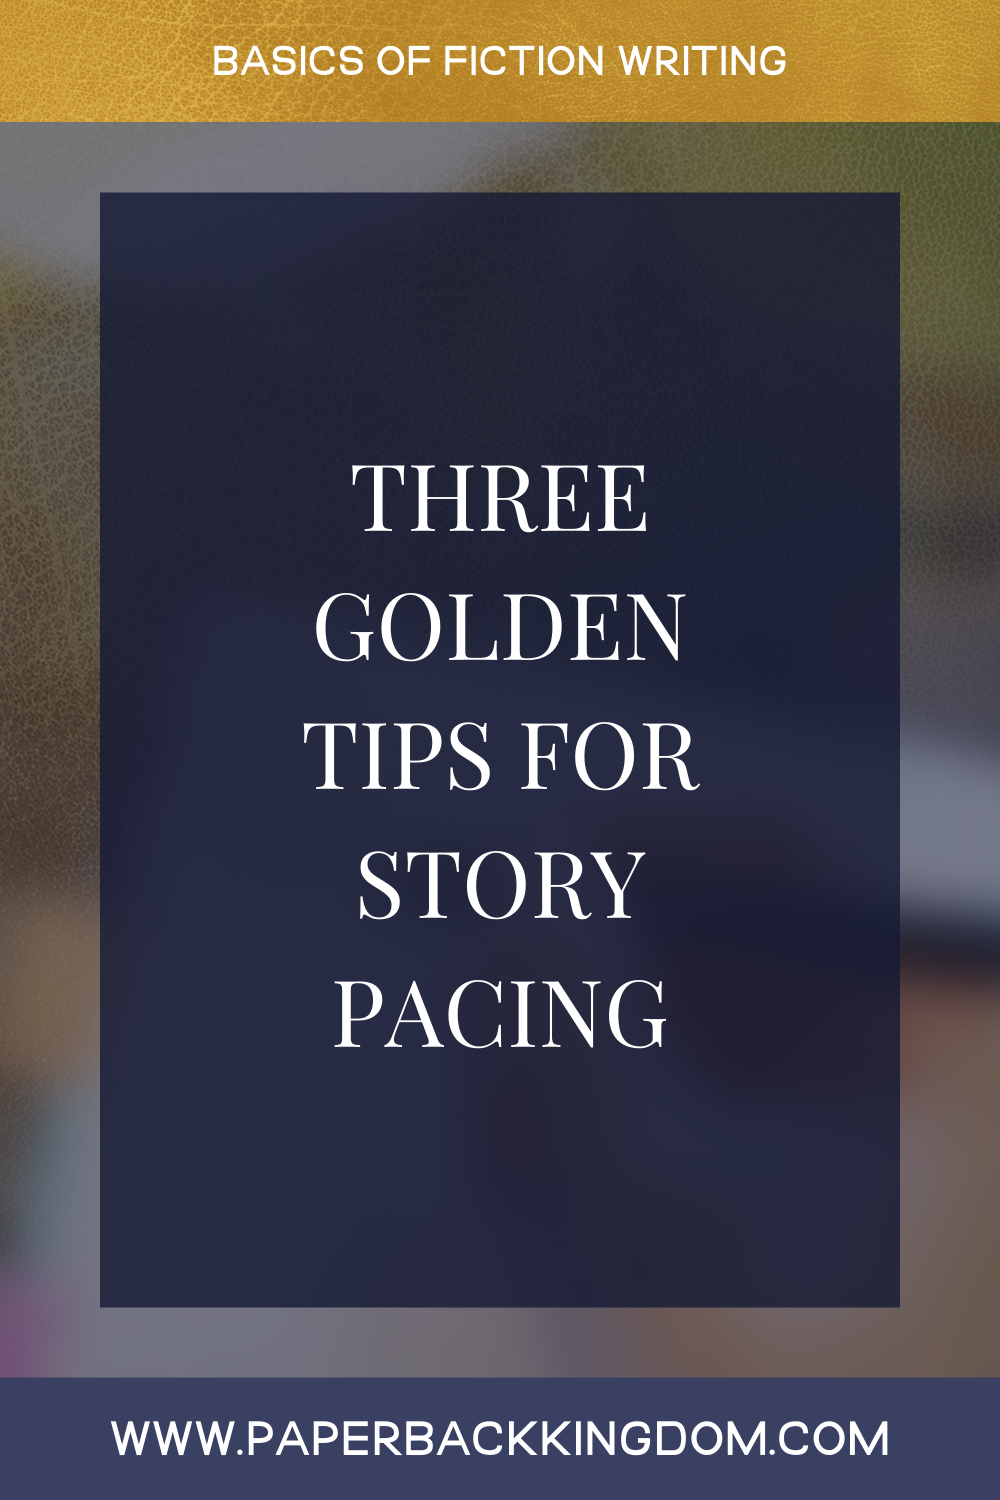 Three Golden Tips For Better Story Pacing - Today I wanted to go into more depth about how to improve story pacing, as it’s one of the most crucial aspects of story writing because it ties into so many other things, like description, atmosphere, and characterisation and flow.